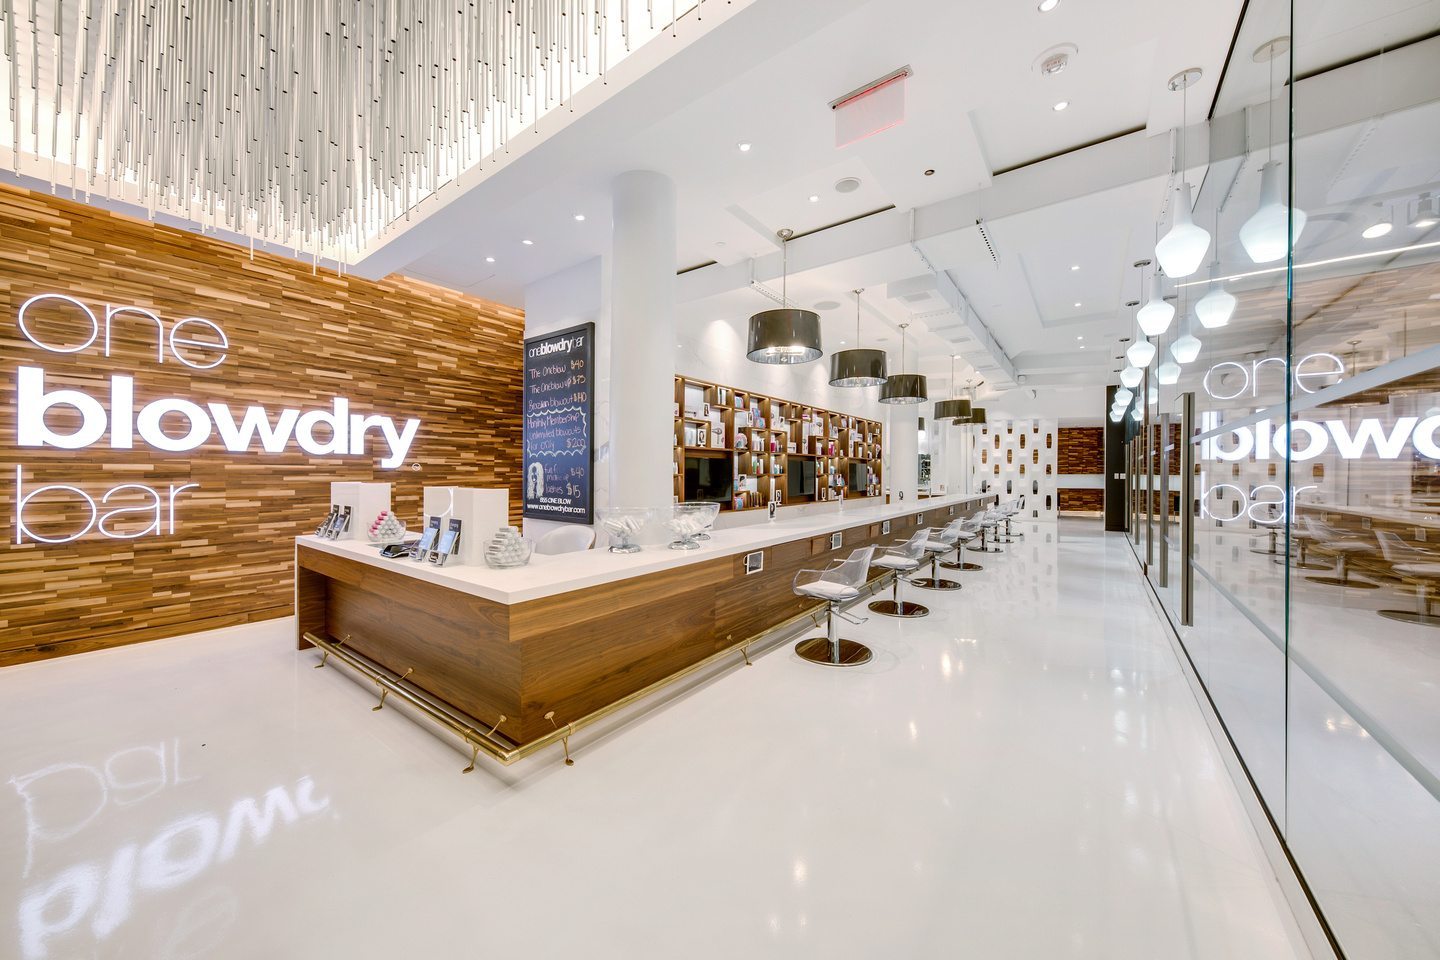 Macy's Blow Dry Bar Herald Square NYC Blow Out Hair Salon · oneblowdrybar® Blow Dry Bar Hair